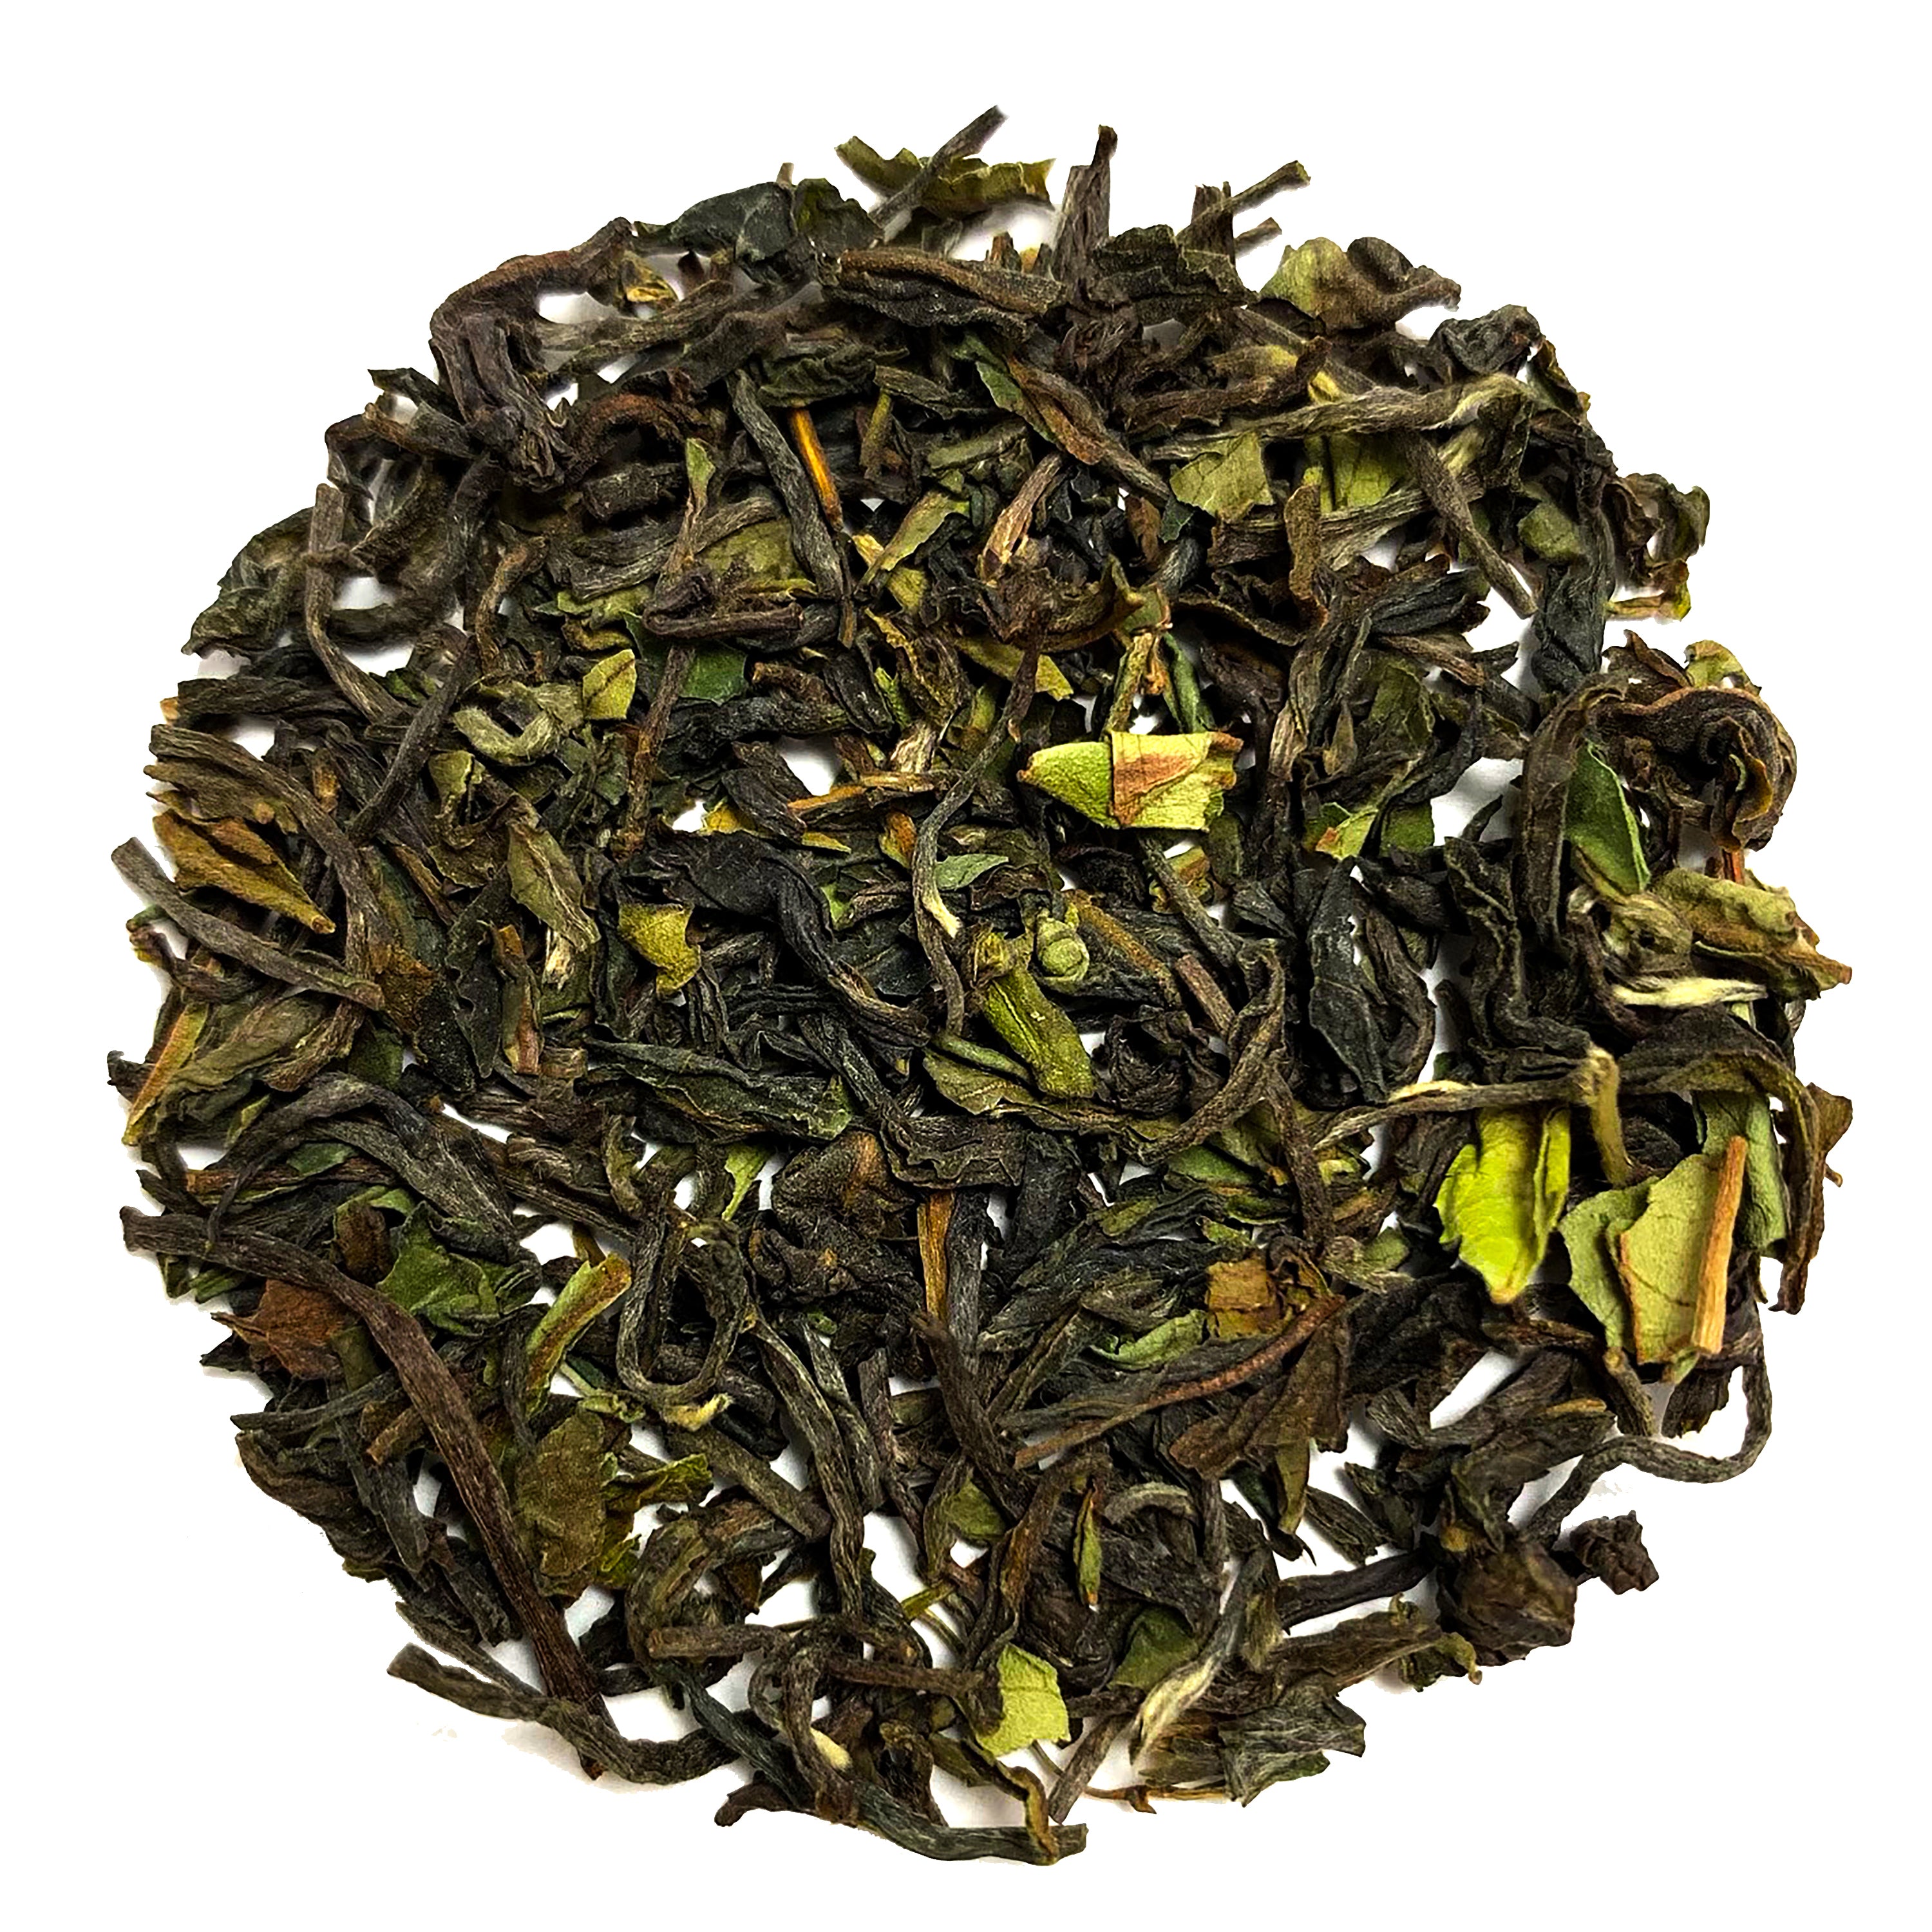 Nepal Ilam tea is grown in the Himalayan mountains of Nepal, this award-winning Nepal ilam black tea is rich and mellow, with a slight malty sweetness and notes of honey and stone fruit.